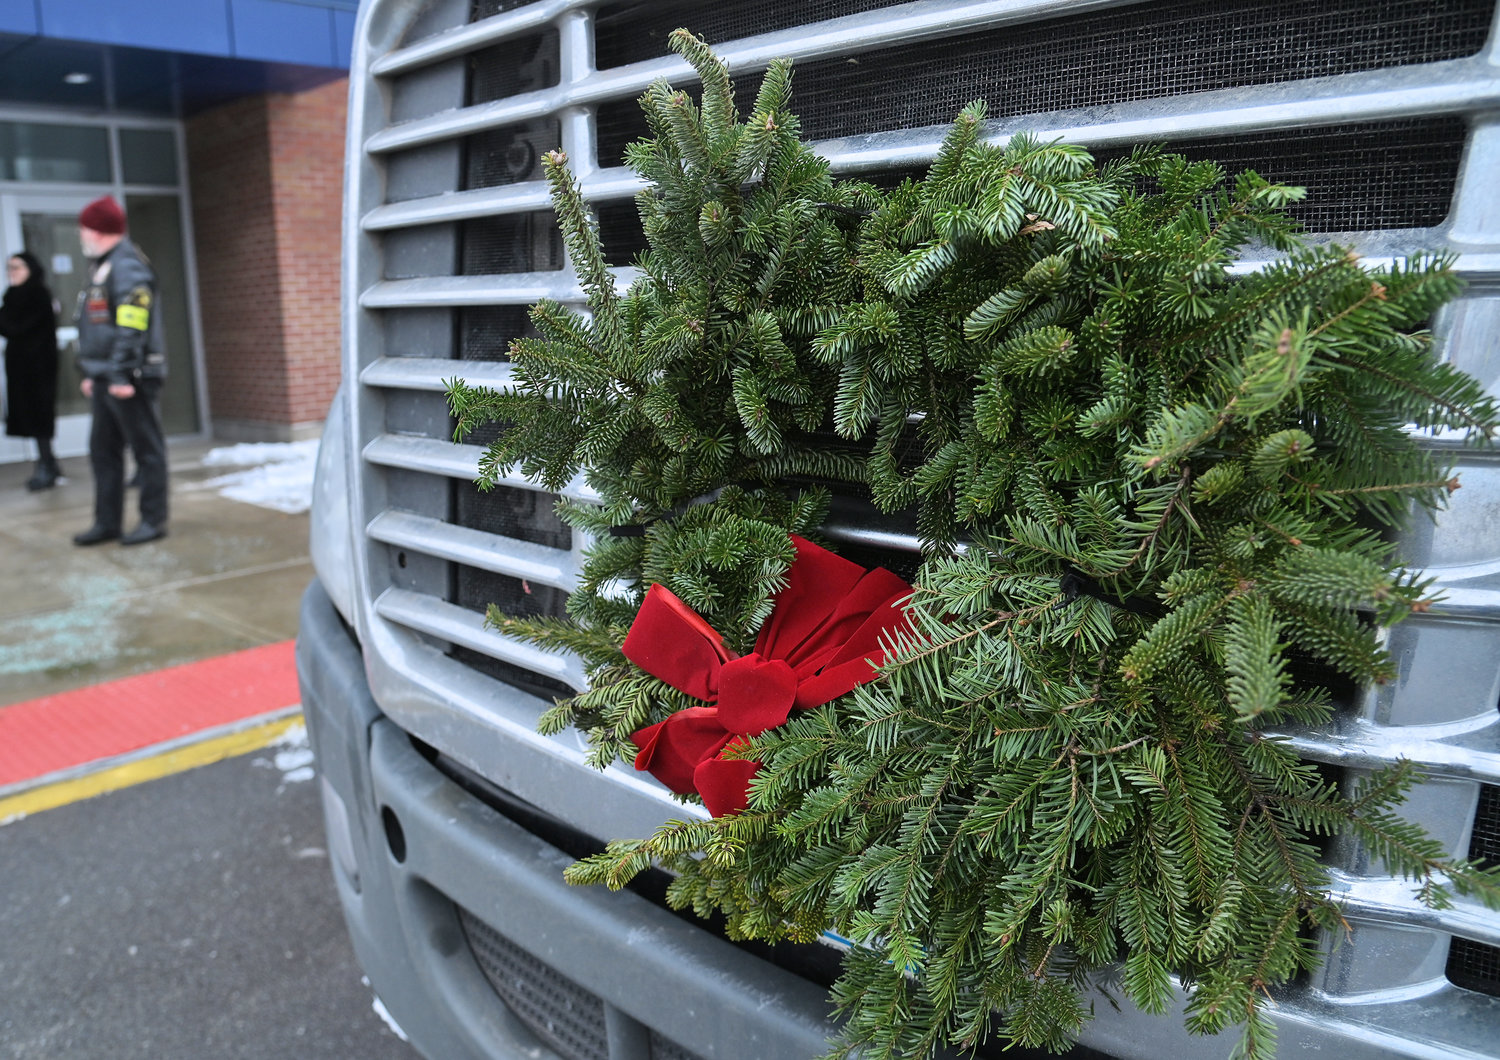 A wreath is seen on the grill of the Walmart truck parked in front of Notre Dame Jr.-Sr. High School Monday, Dec. 12. The trailer is full of wreaths for Wreaths Across America distribution this coming Saturday.